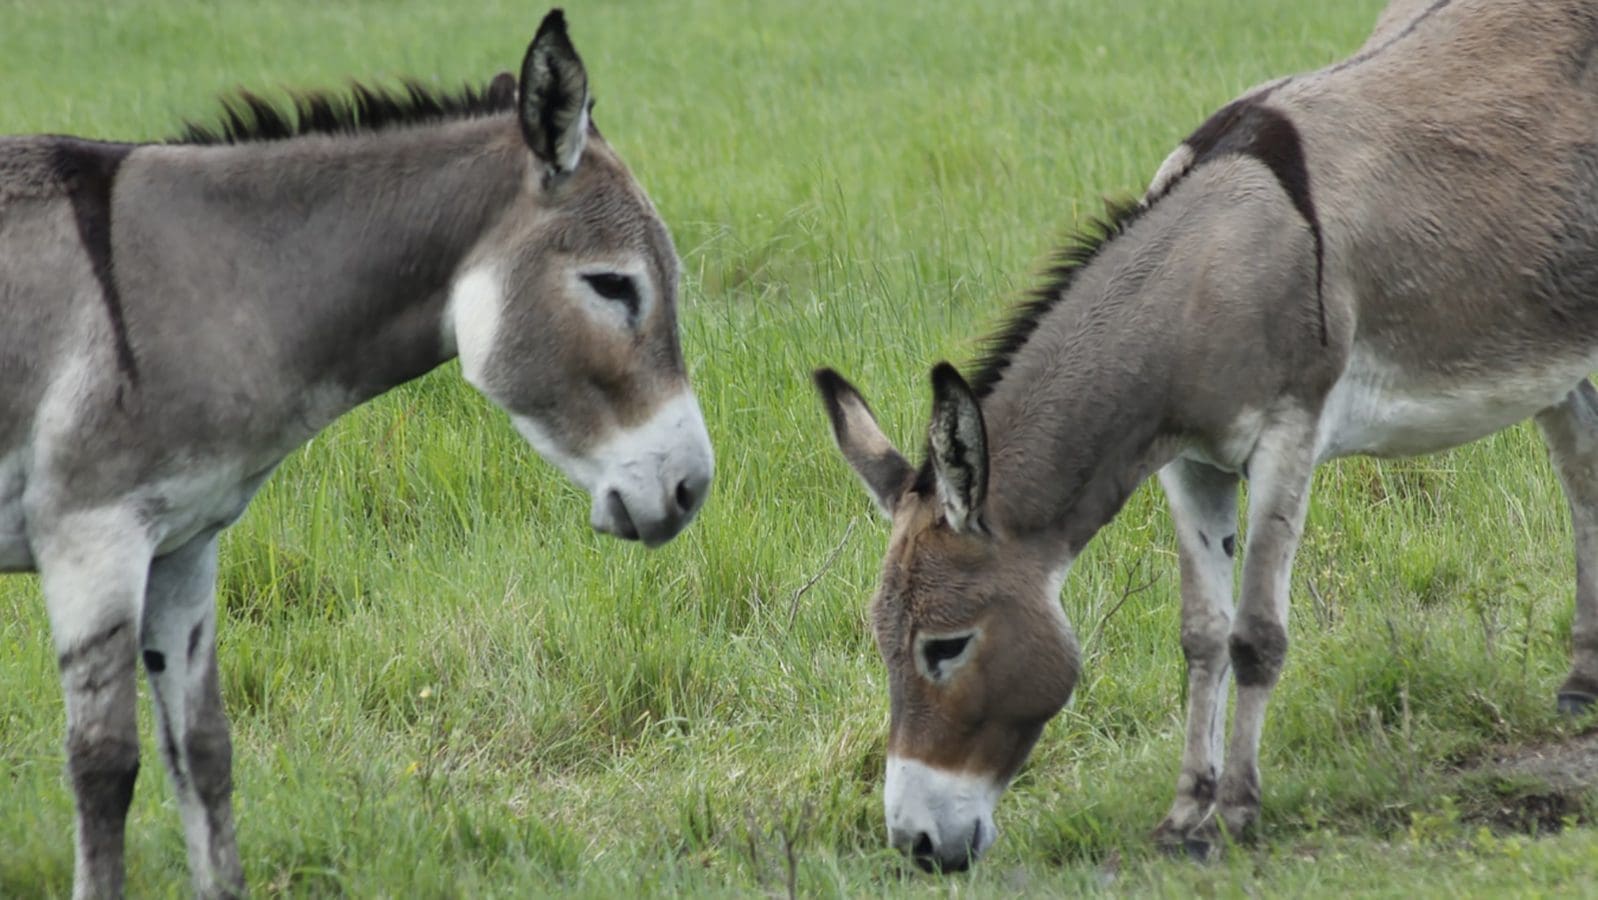 <strong>Equine welfare activists call for 15-year ban on donkey slaughter in Africa to curb unsustainable exploitation</strong>